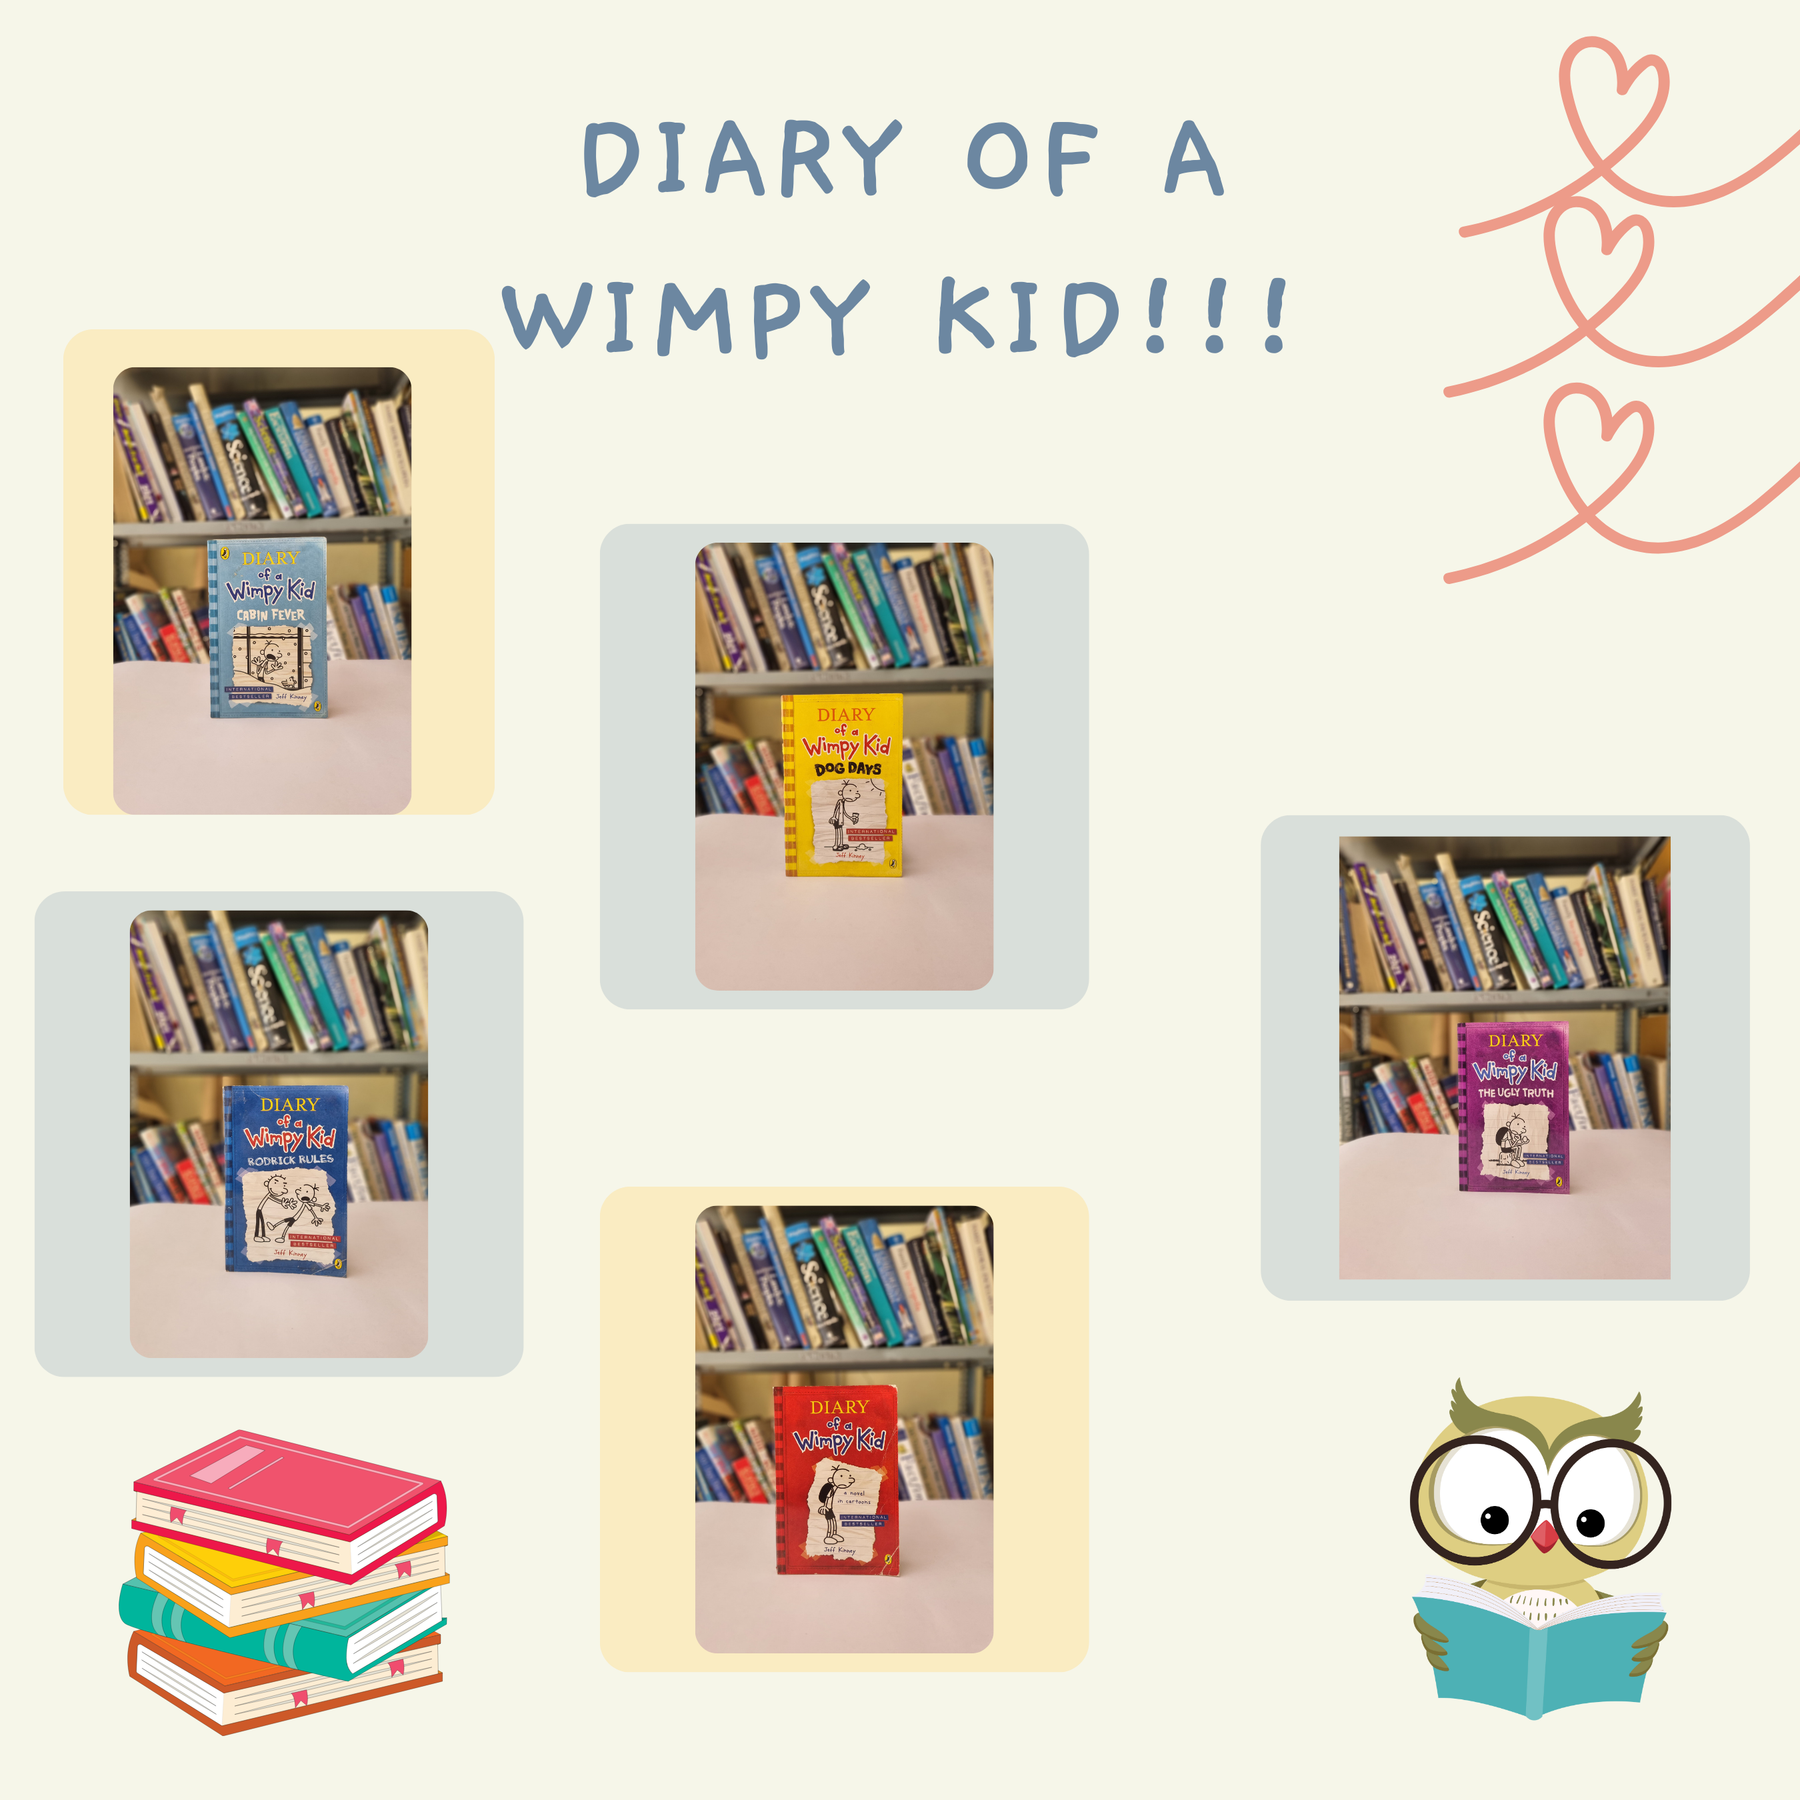 Top Reasons Kids Will Love ‘Diary of a Wimpy Kid’ by Jeff Kinney